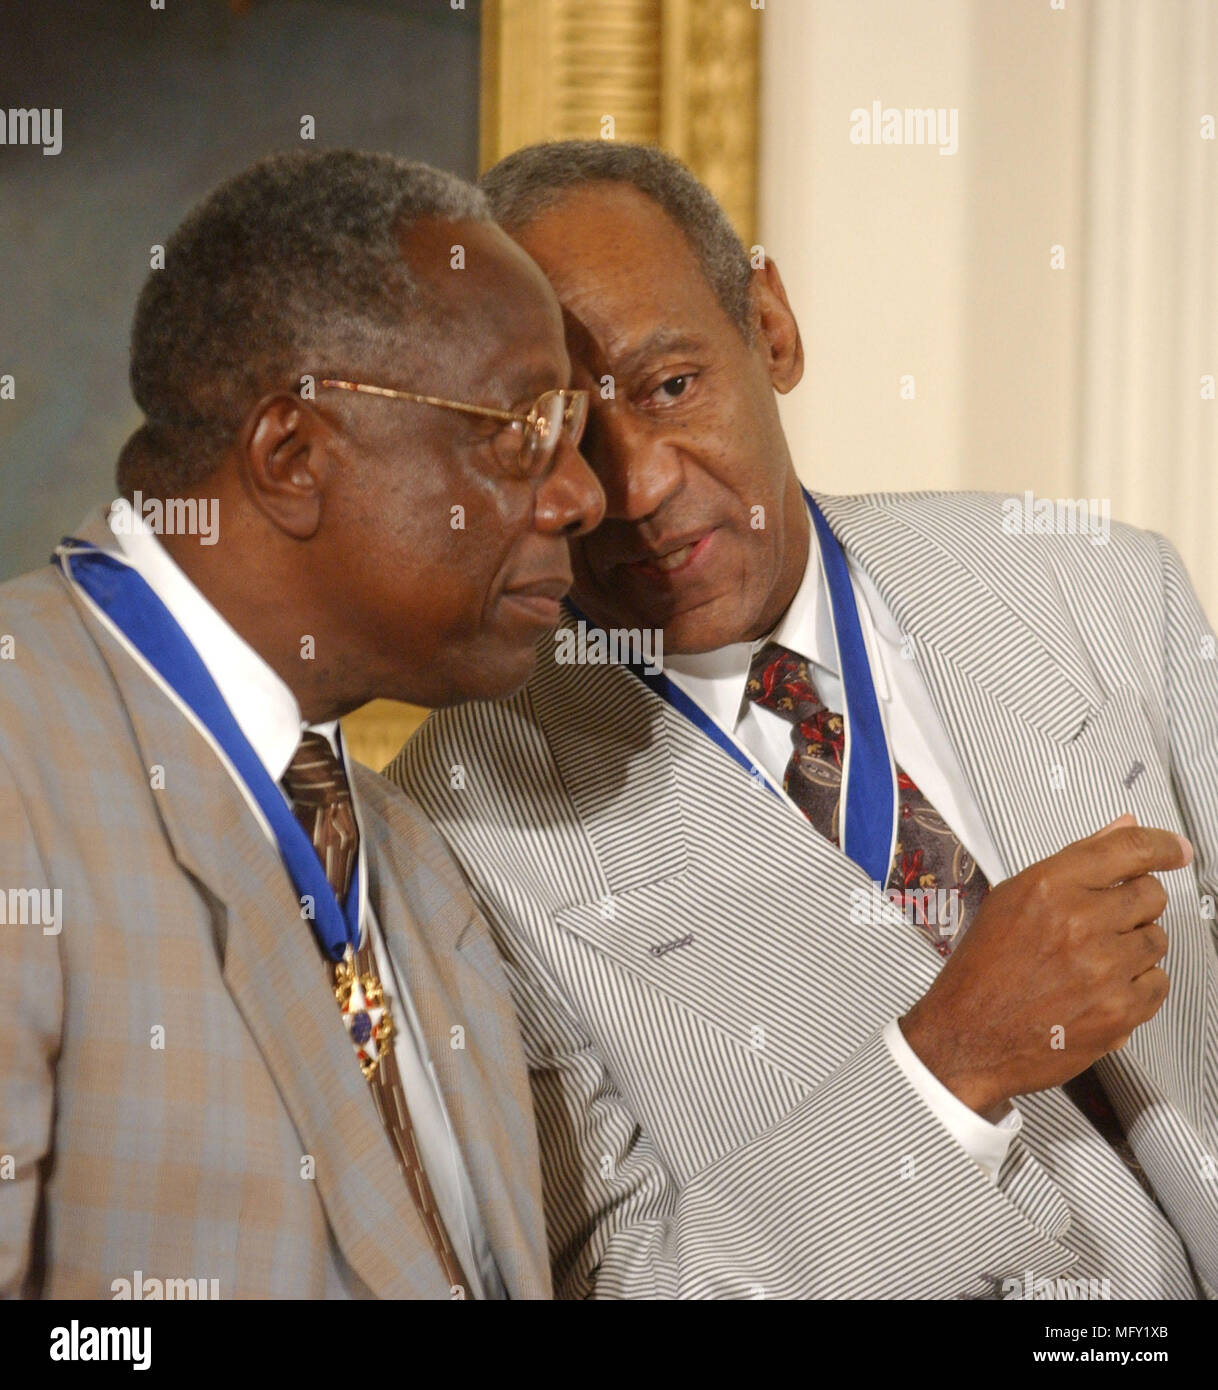 Washington, USA. 09th July, 2002. FILED - Hank Aaron and Bill Cosby share a thought after they received the Presidential Medal of Freedom from United States President George W. Bush during a ceremony in the East Room of the White House in Washington, DC on July 9, 2002.Credit: Ron Sachs/CNP - NO WIRE SERVICE · Credit: Ron Sachs/Consolidated News Photos/Ron Sachs/CNP/dpa/Alamy Live News Stock Photo